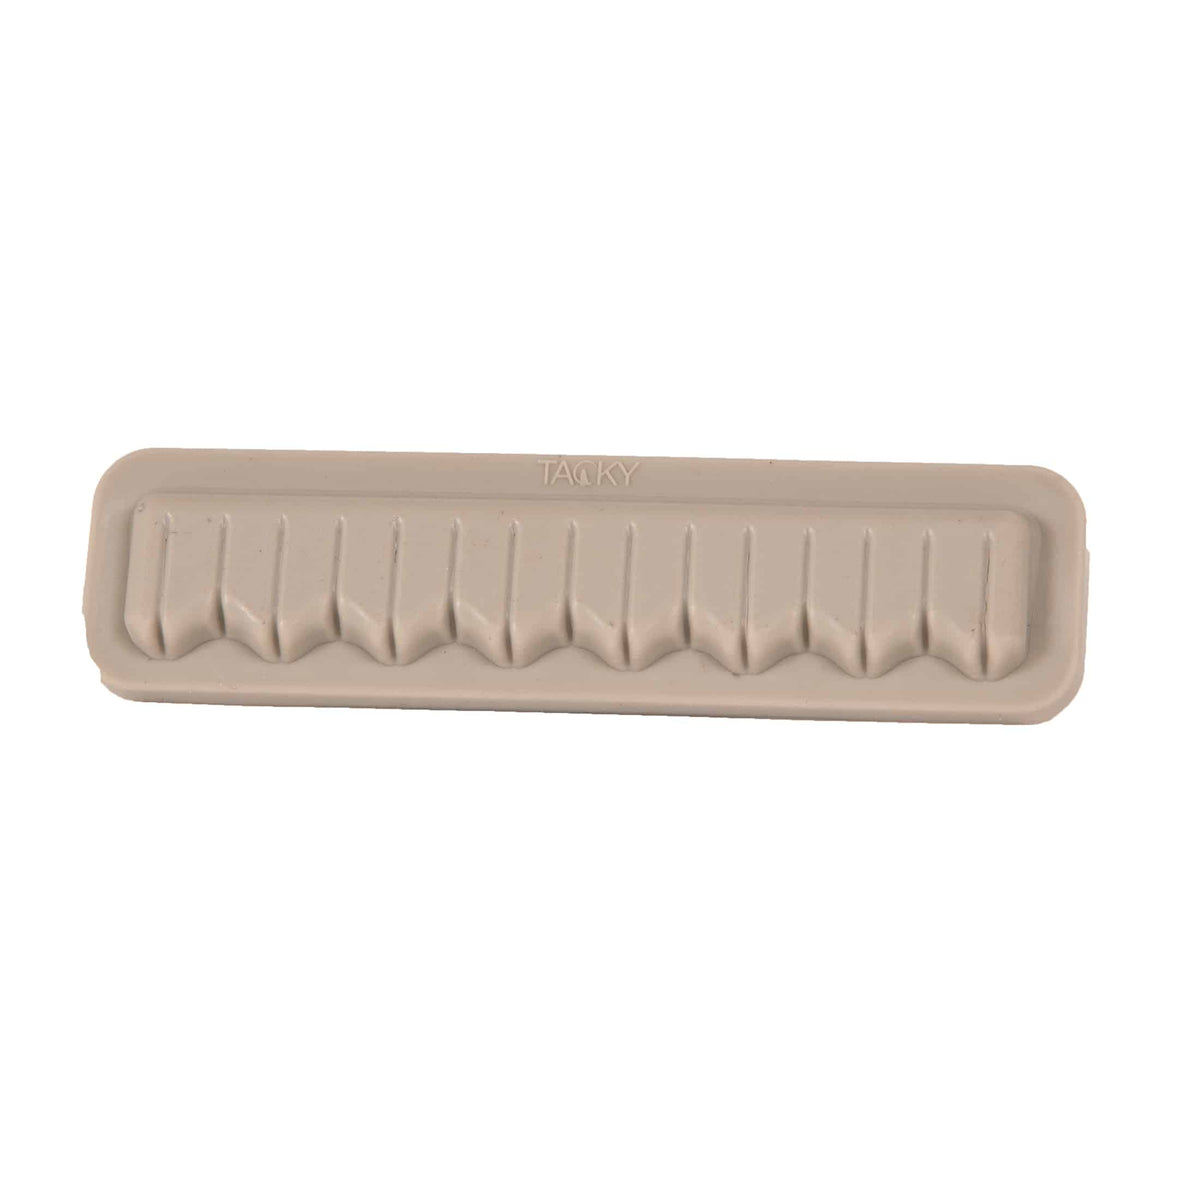 816332015717 TFD-2.0 Fishpond Tacky Fly Dock 2.0 Silicone Fly Fishing Fly Storage Pad Top Without Flies